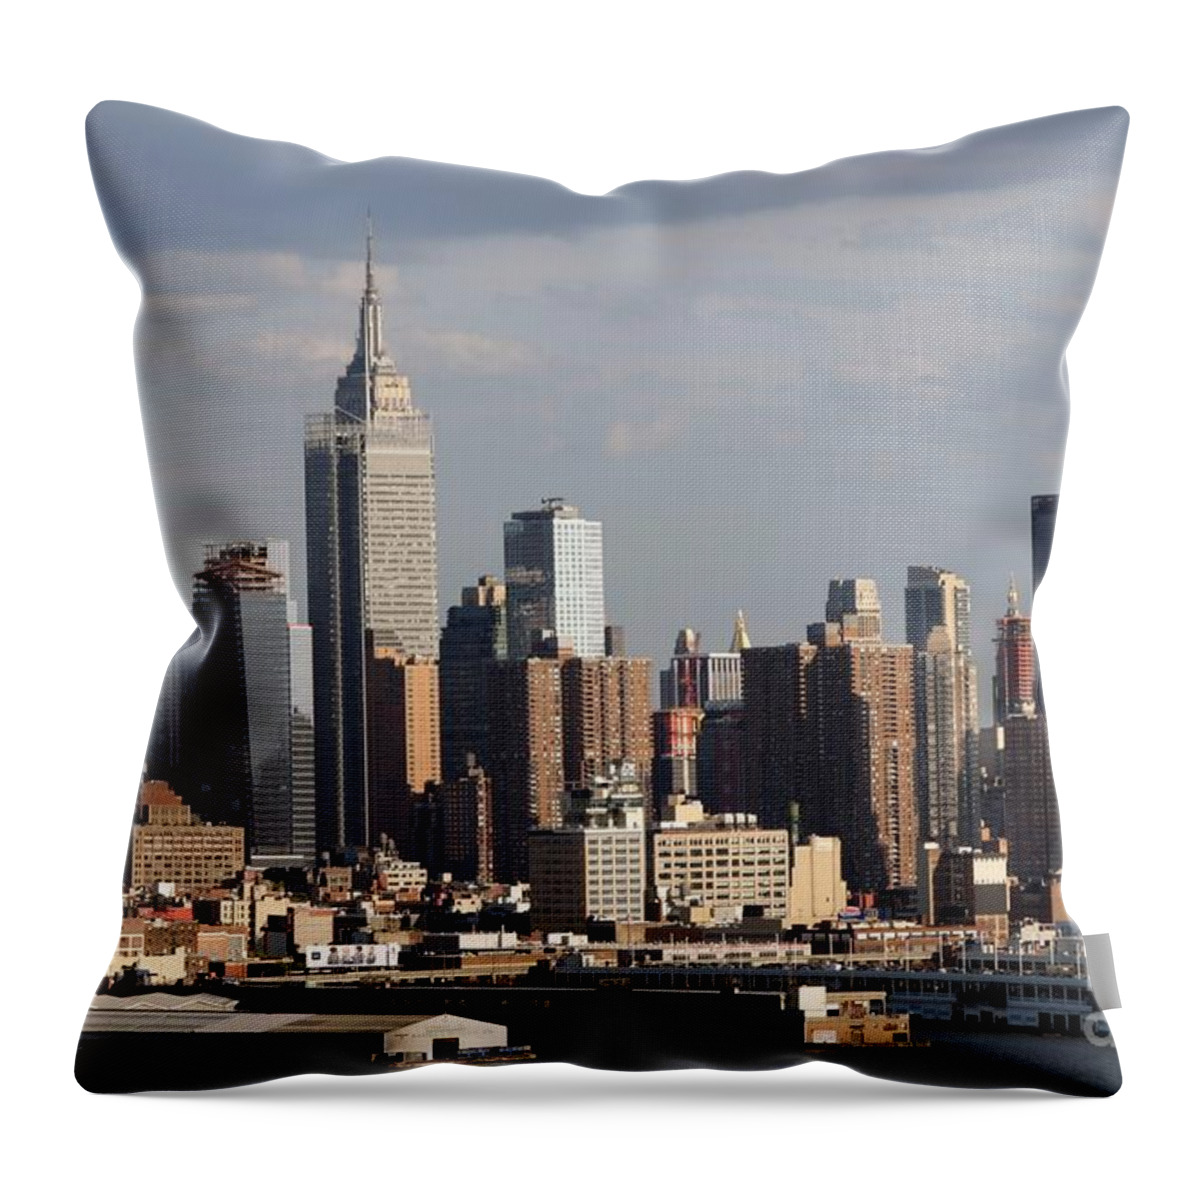 New York City Throw Pillow featuring the photograph Afternoon and Clouds In New York City by Living Color Photography Lorraine Lynch